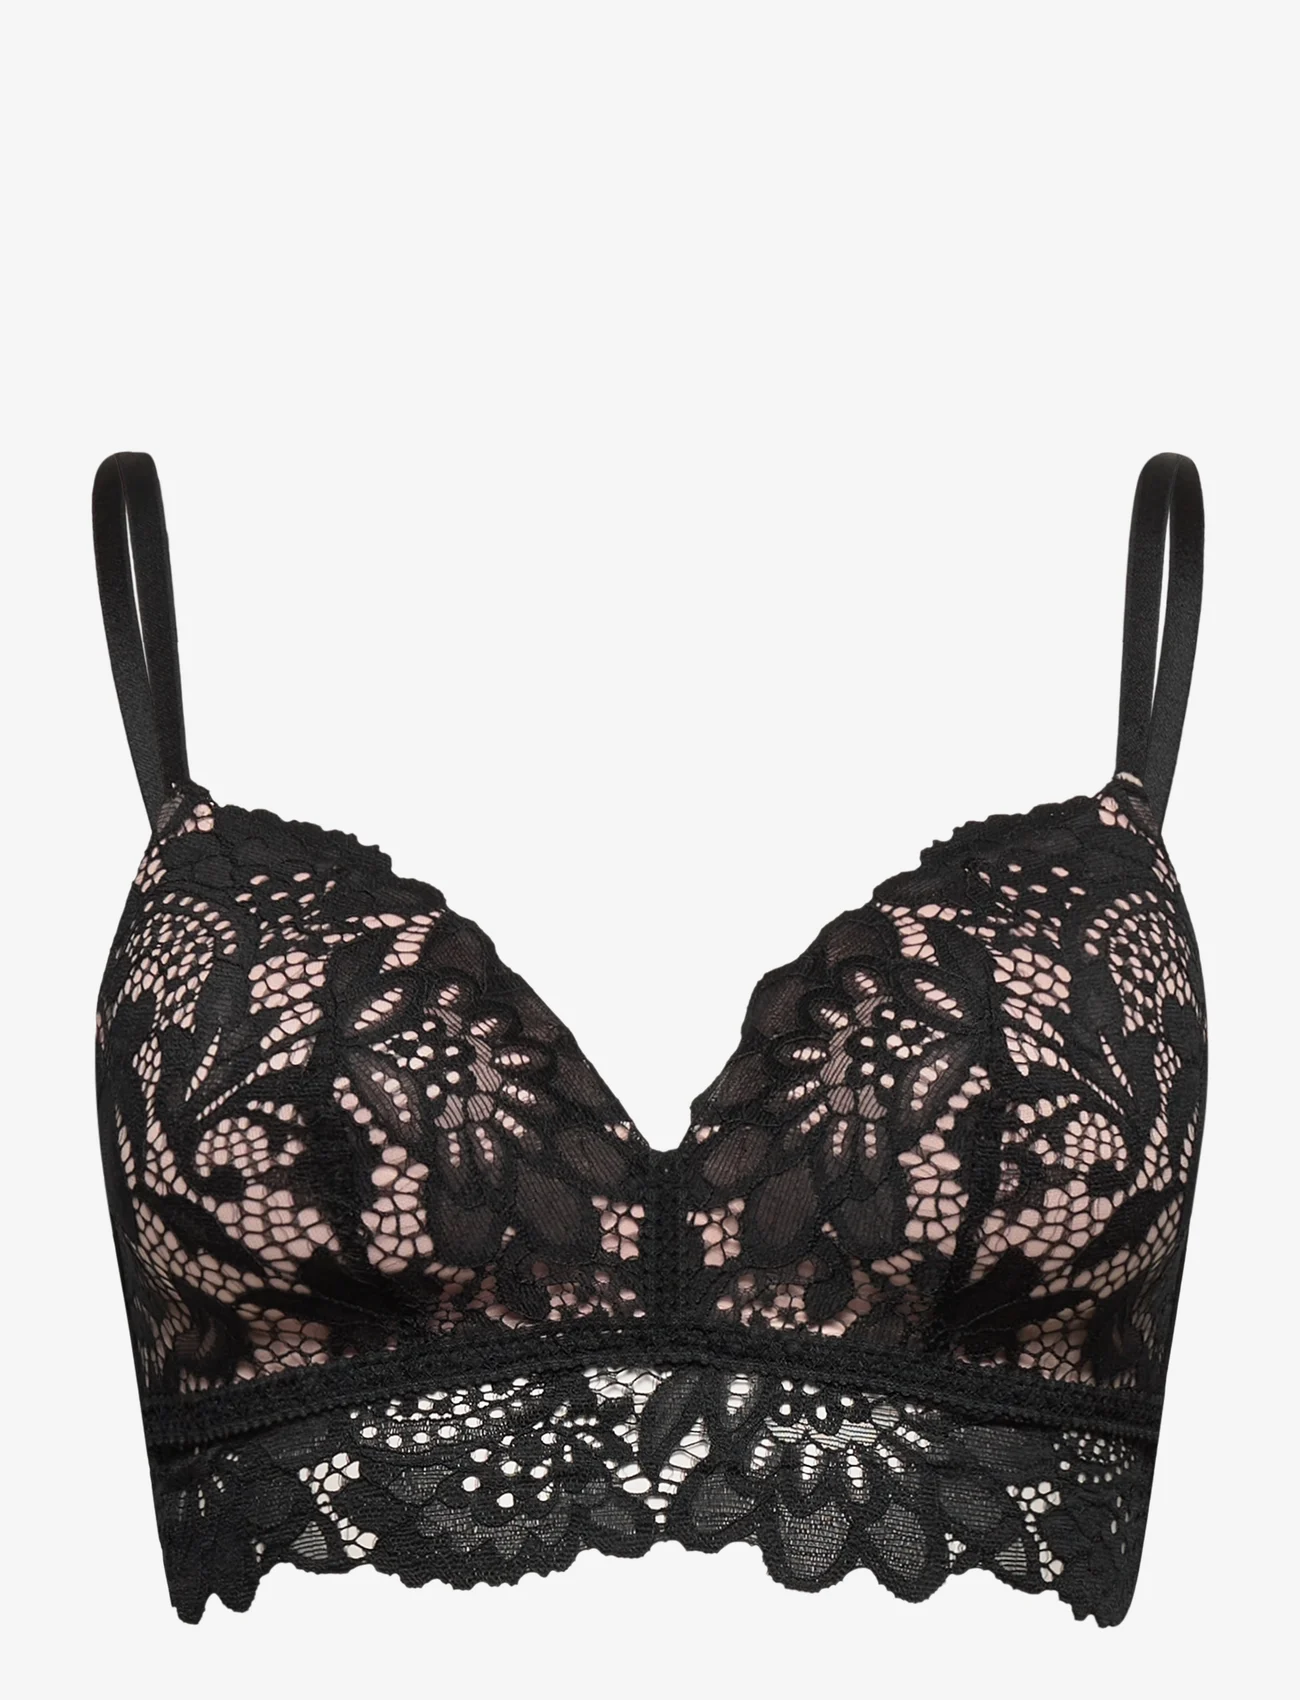 Hunkemöller - Shiloh non wired low d - push-up bh:ar - caviar - 1